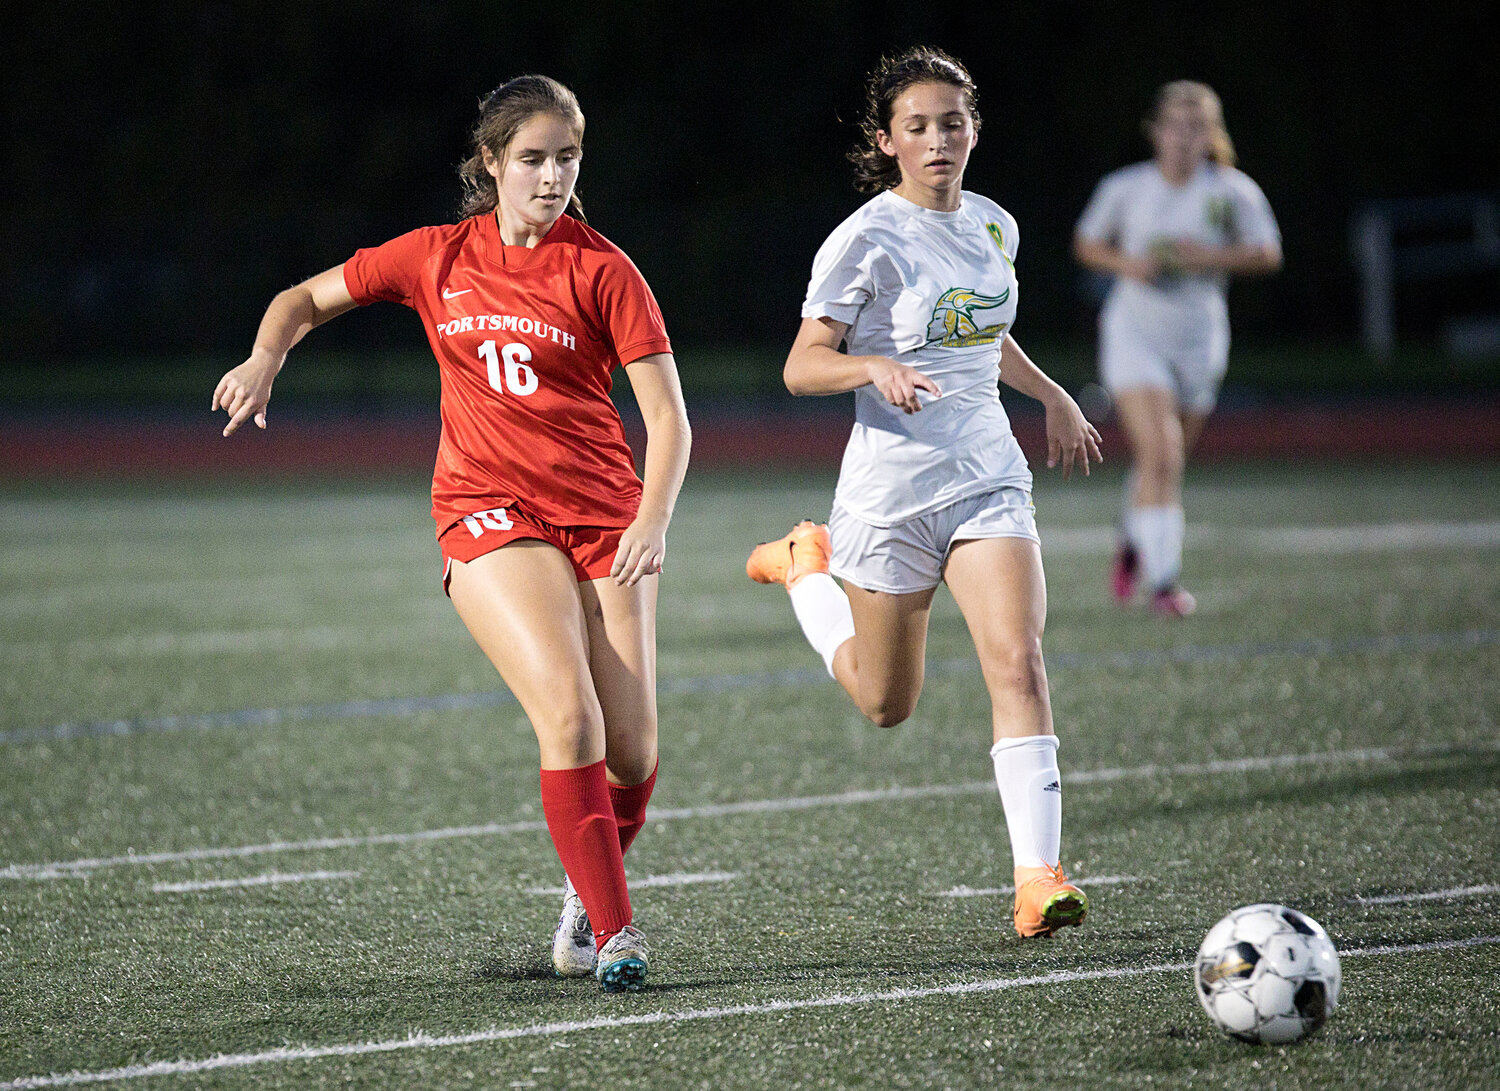 Evelyn Shuster kicks the ball ahead of a North Smithfield opponent.